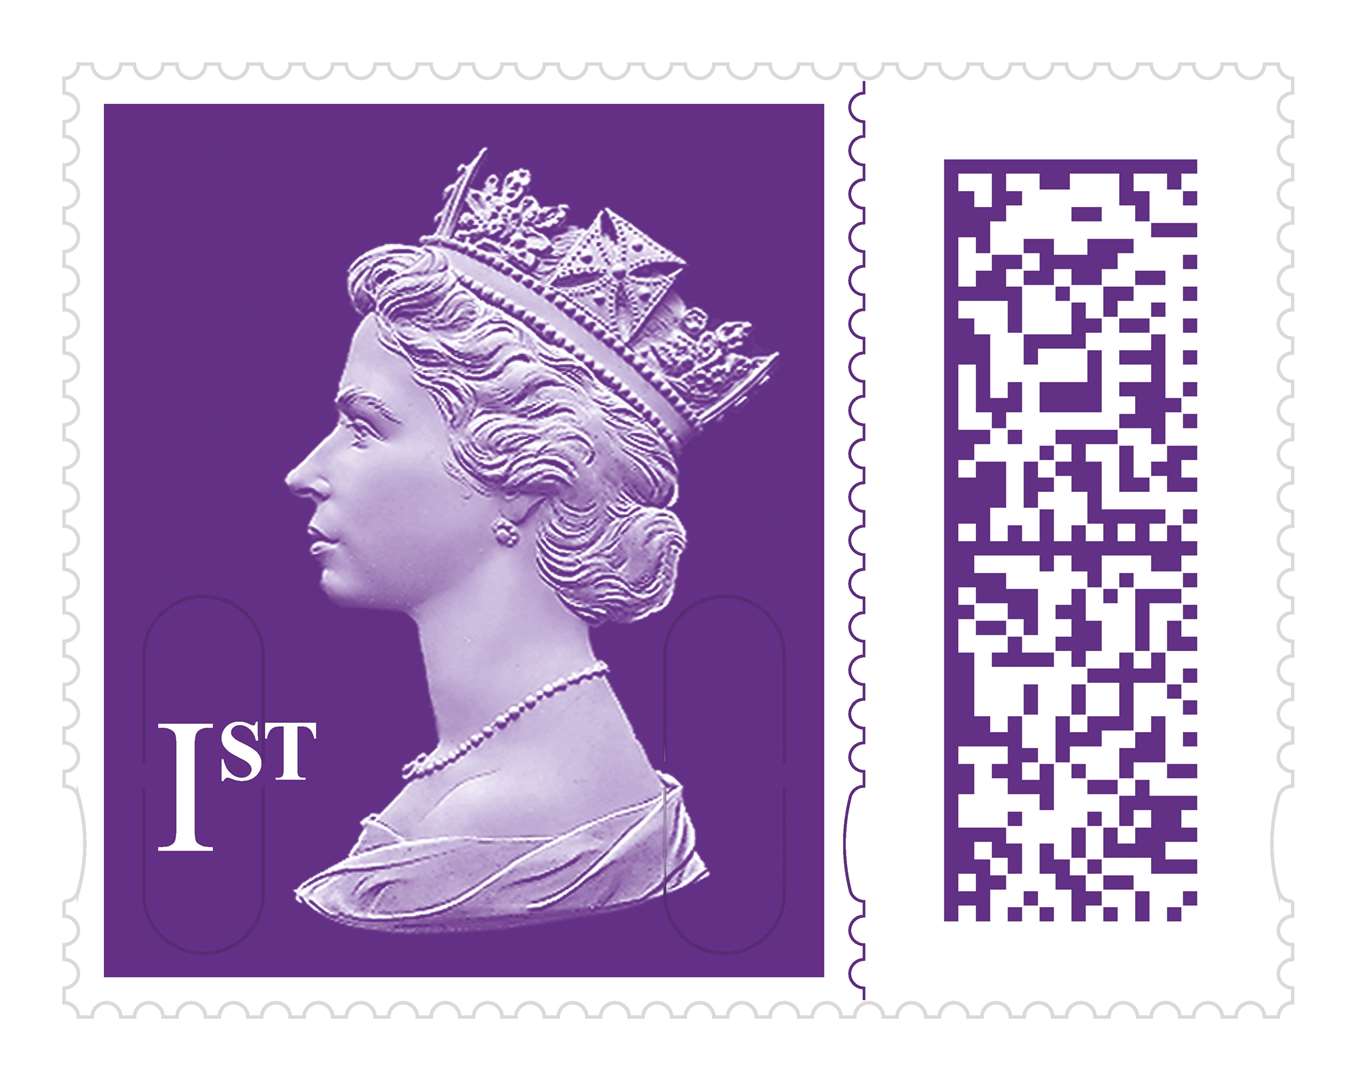 New stamps now carry a digital barcode. Image: Royal Mail.